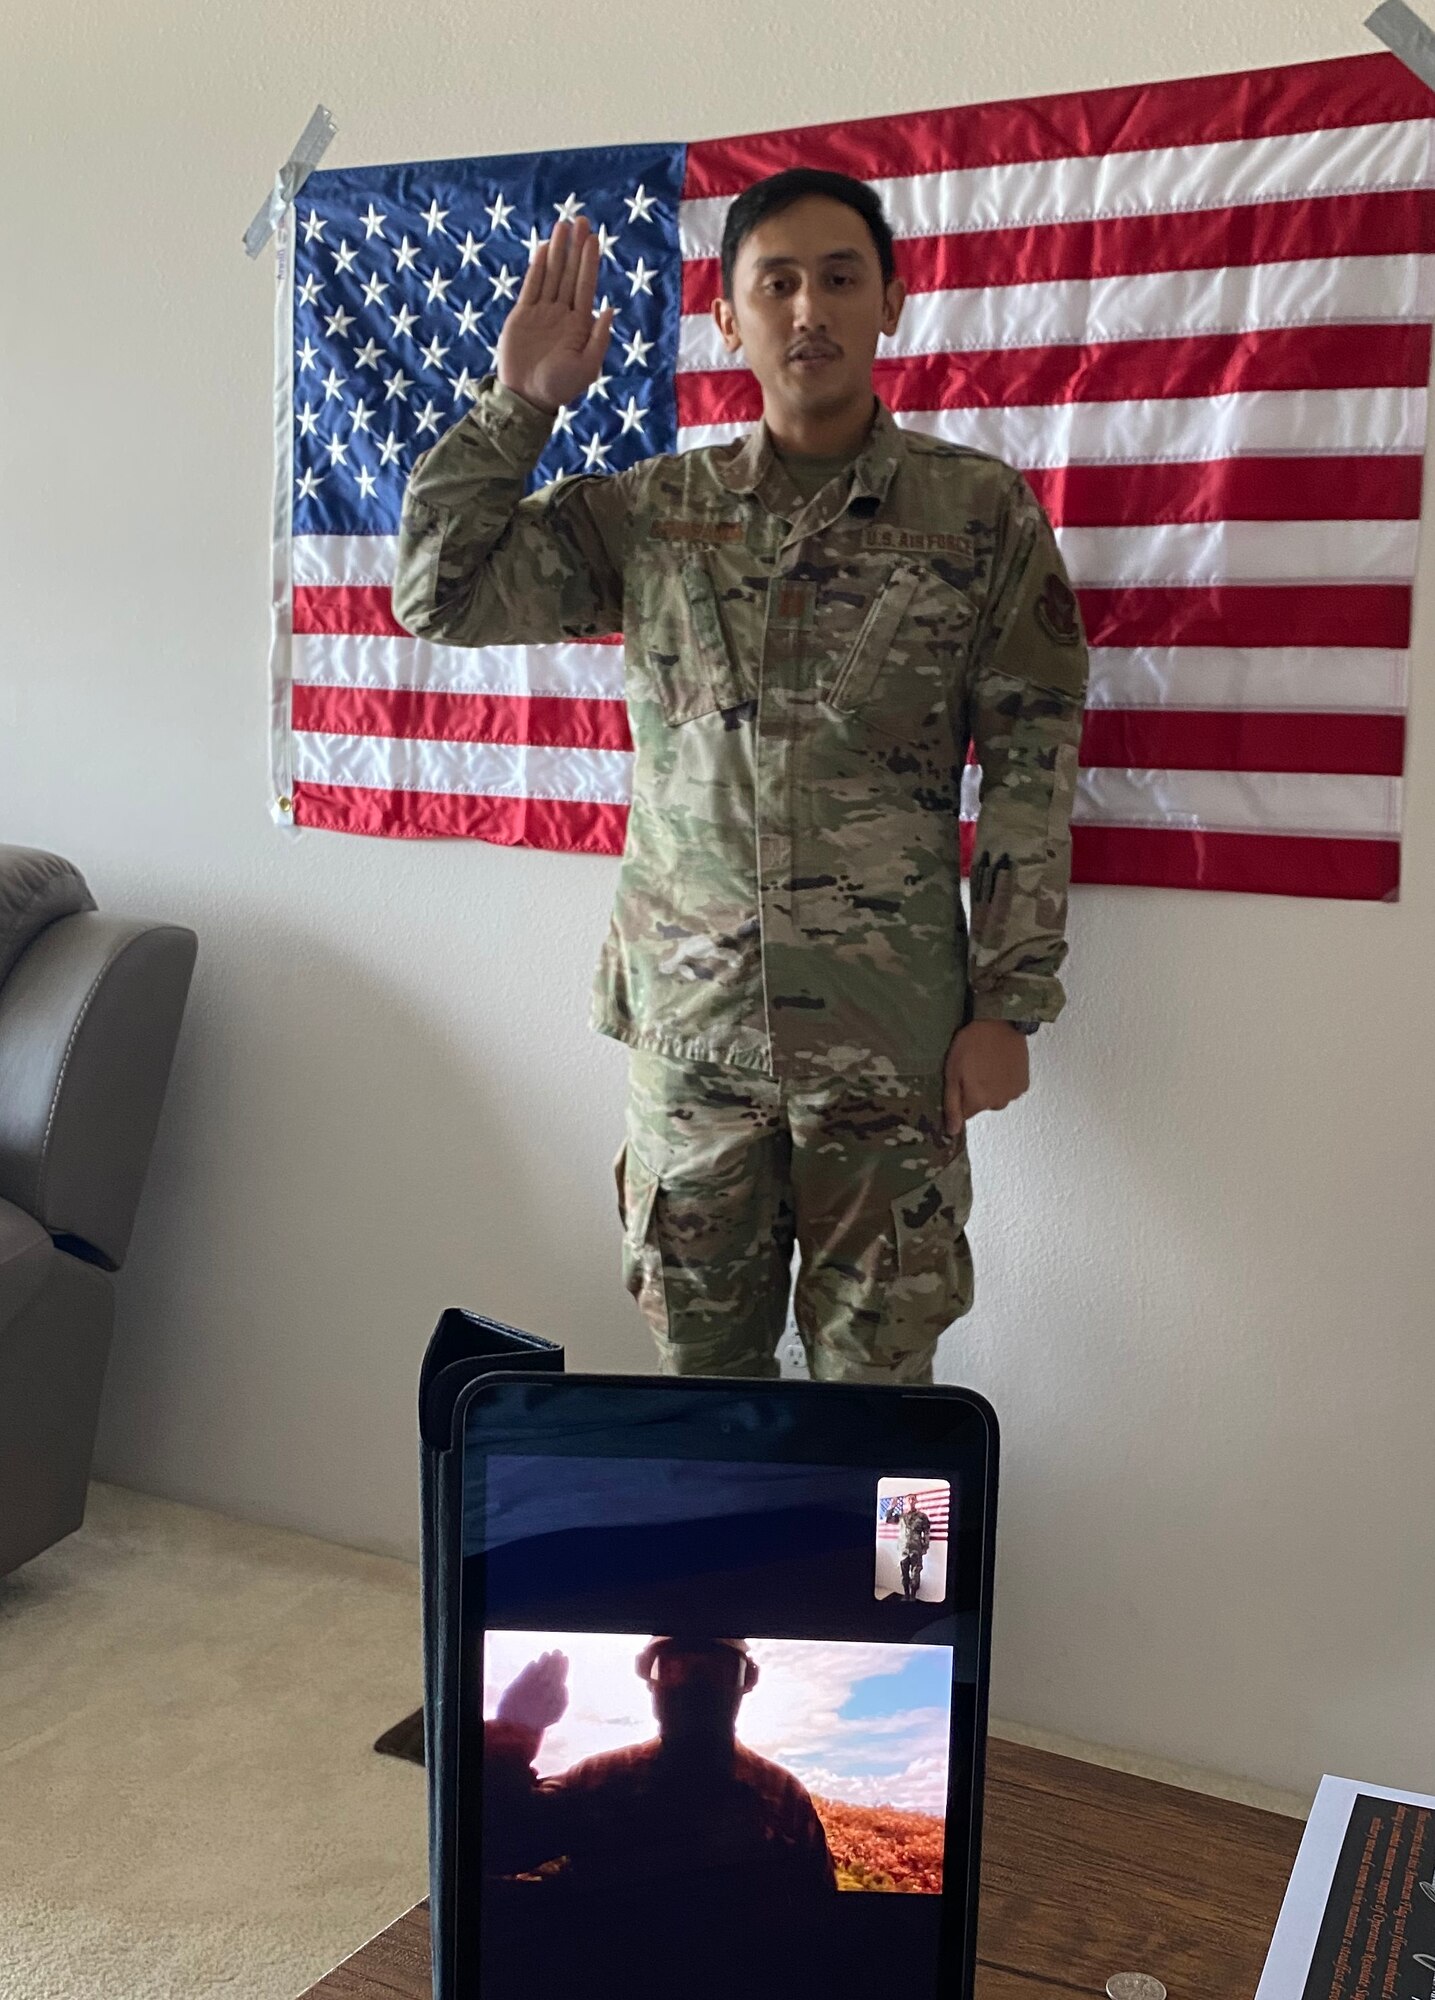 A photo of U.S. Air Force Capt. John Penaranda, the 624th Civil Engineer Squadron readiness flight commander, administering the oath of enlistment via video teleconference during a virtual reenlistment for Tech. Sgt. Miguel Gil, a 624th Civil Engineer Squadron water and fuel systems maintenance craftsman, as part of the 624th Regional Support Group virtual unit training assembly April 4, 2020, from his home in Hawaii. Air Force Reserve Airmen in Hawaii and Guam continued mission readiness training during the first-ever 624th RSG virtual UTA, which was implemented to help keep Airmen safe during COVID-19 pandemic. (Courtesy Photo)